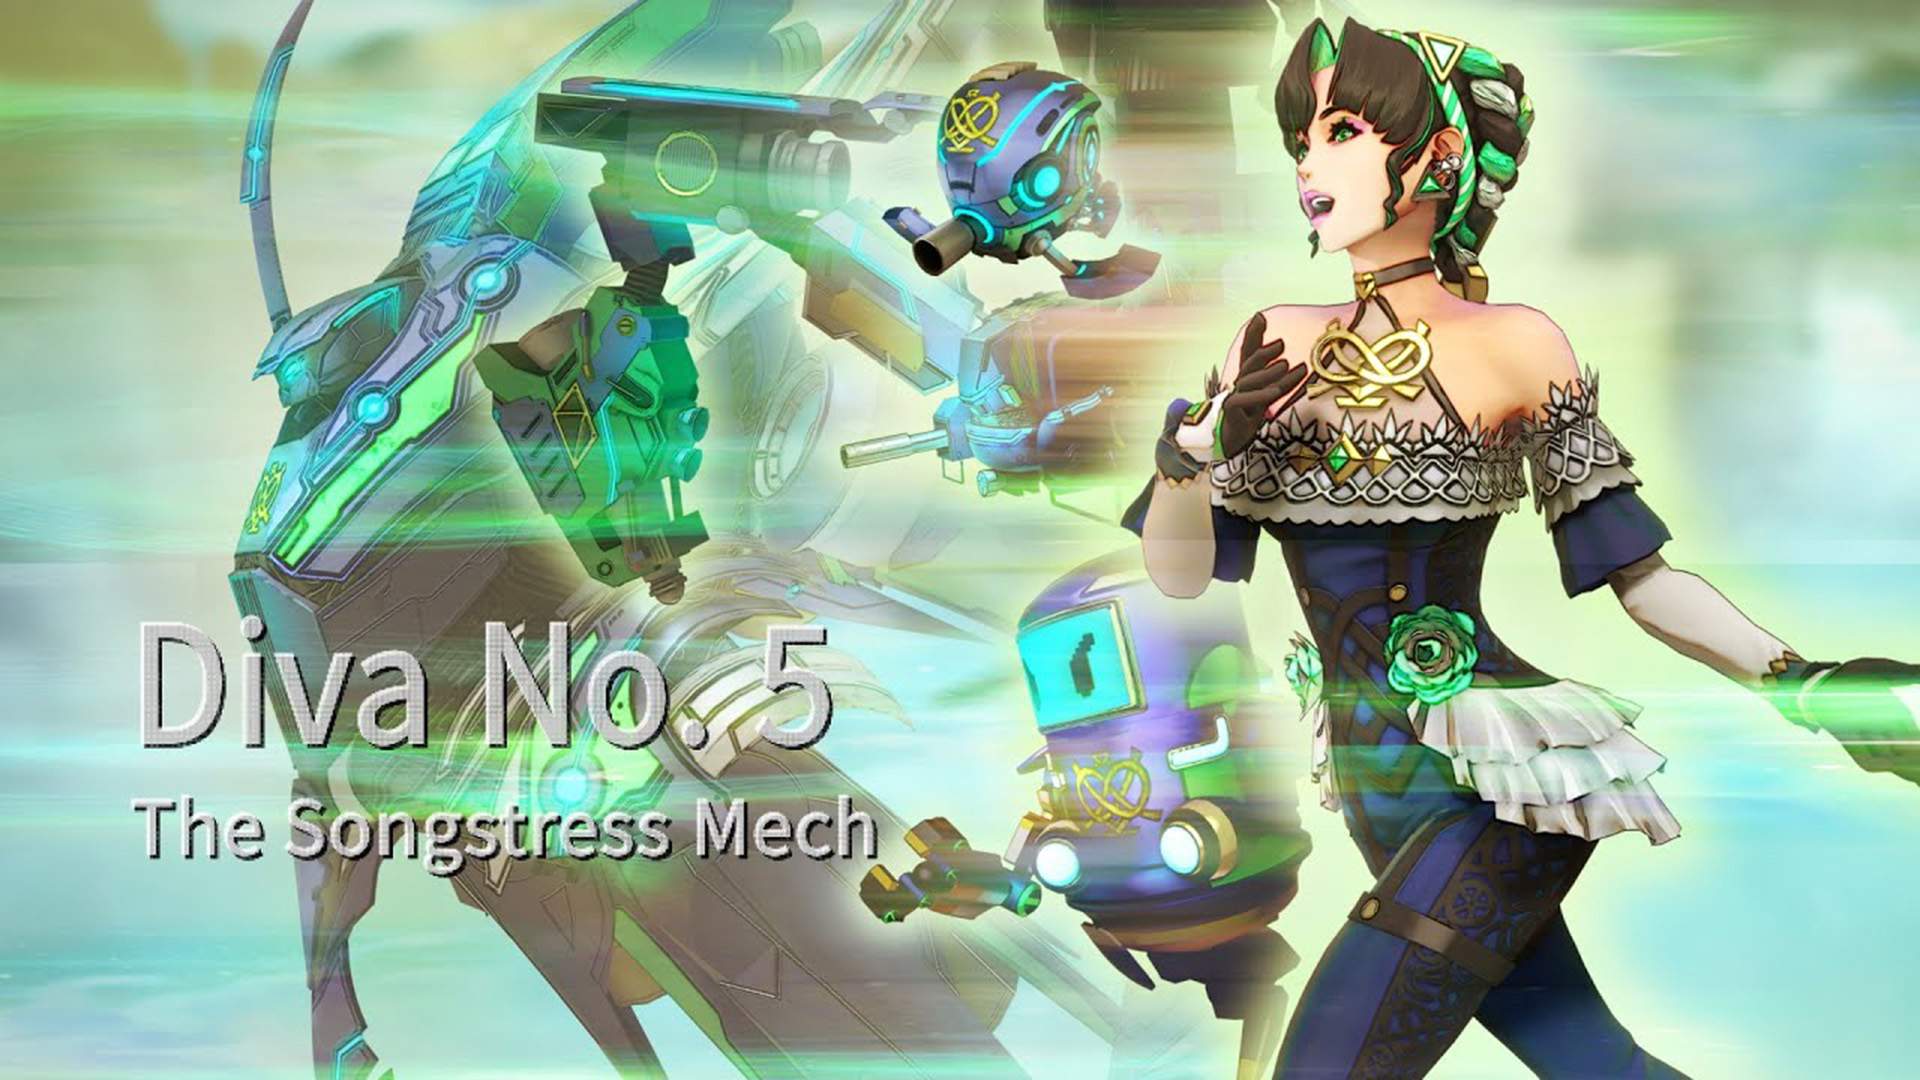 1 of the game’s protagonists Diva in her human & robot form & text "Diva No. 5 The Songstress Mech"